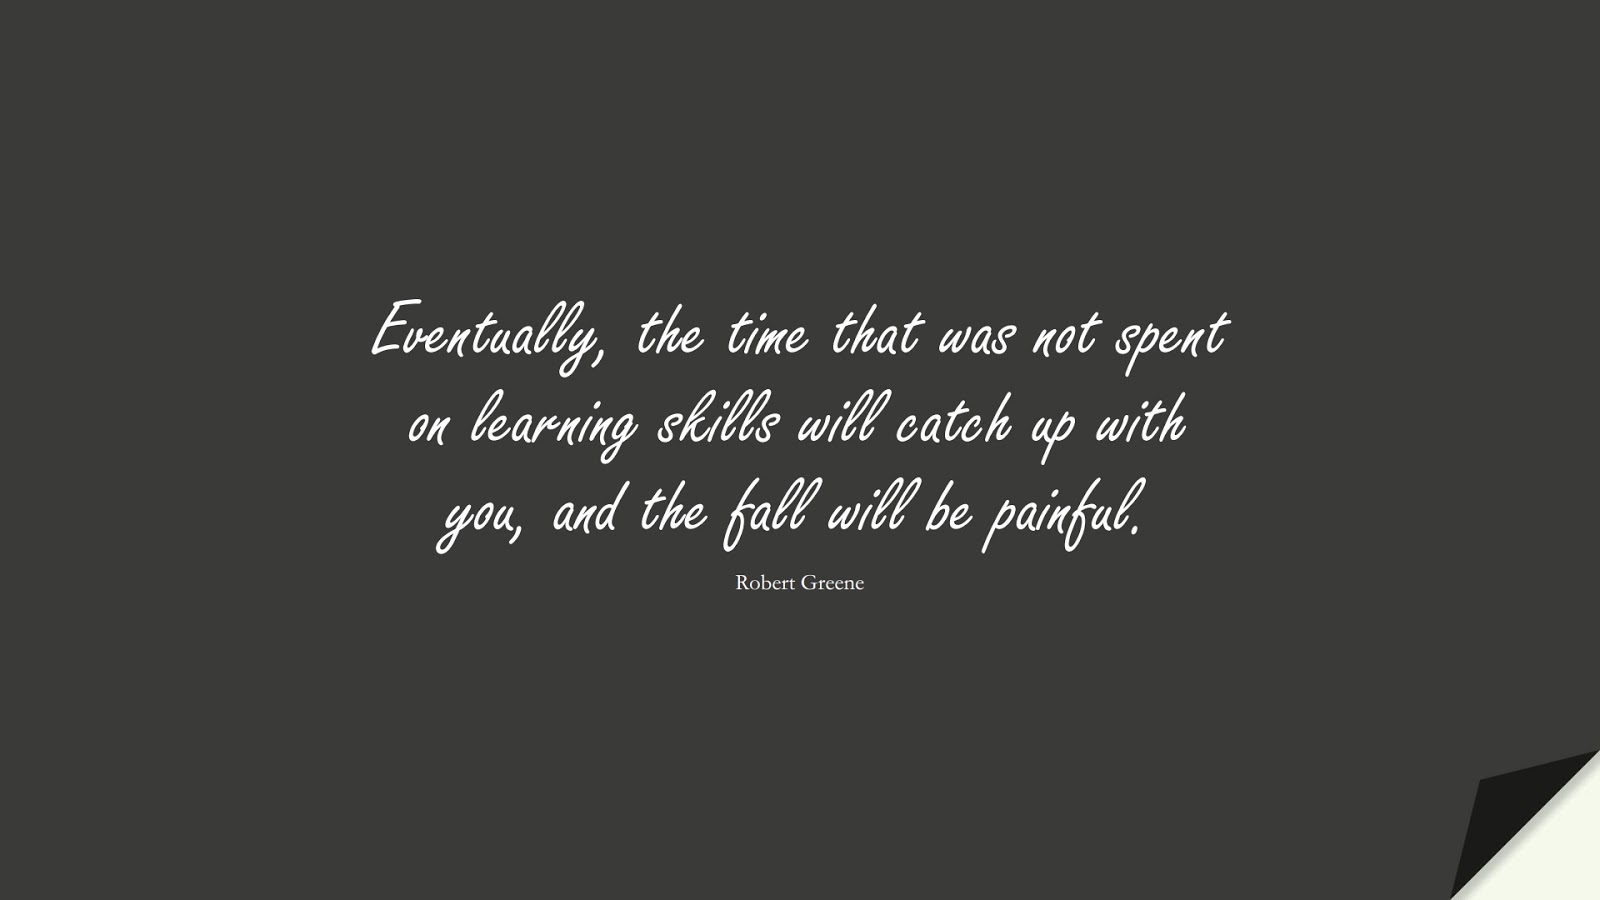 Eventually, the time that was not spent on learning skills will catch up with you, and the fall will be painful. (Robert Greene);  #StoicQuotes